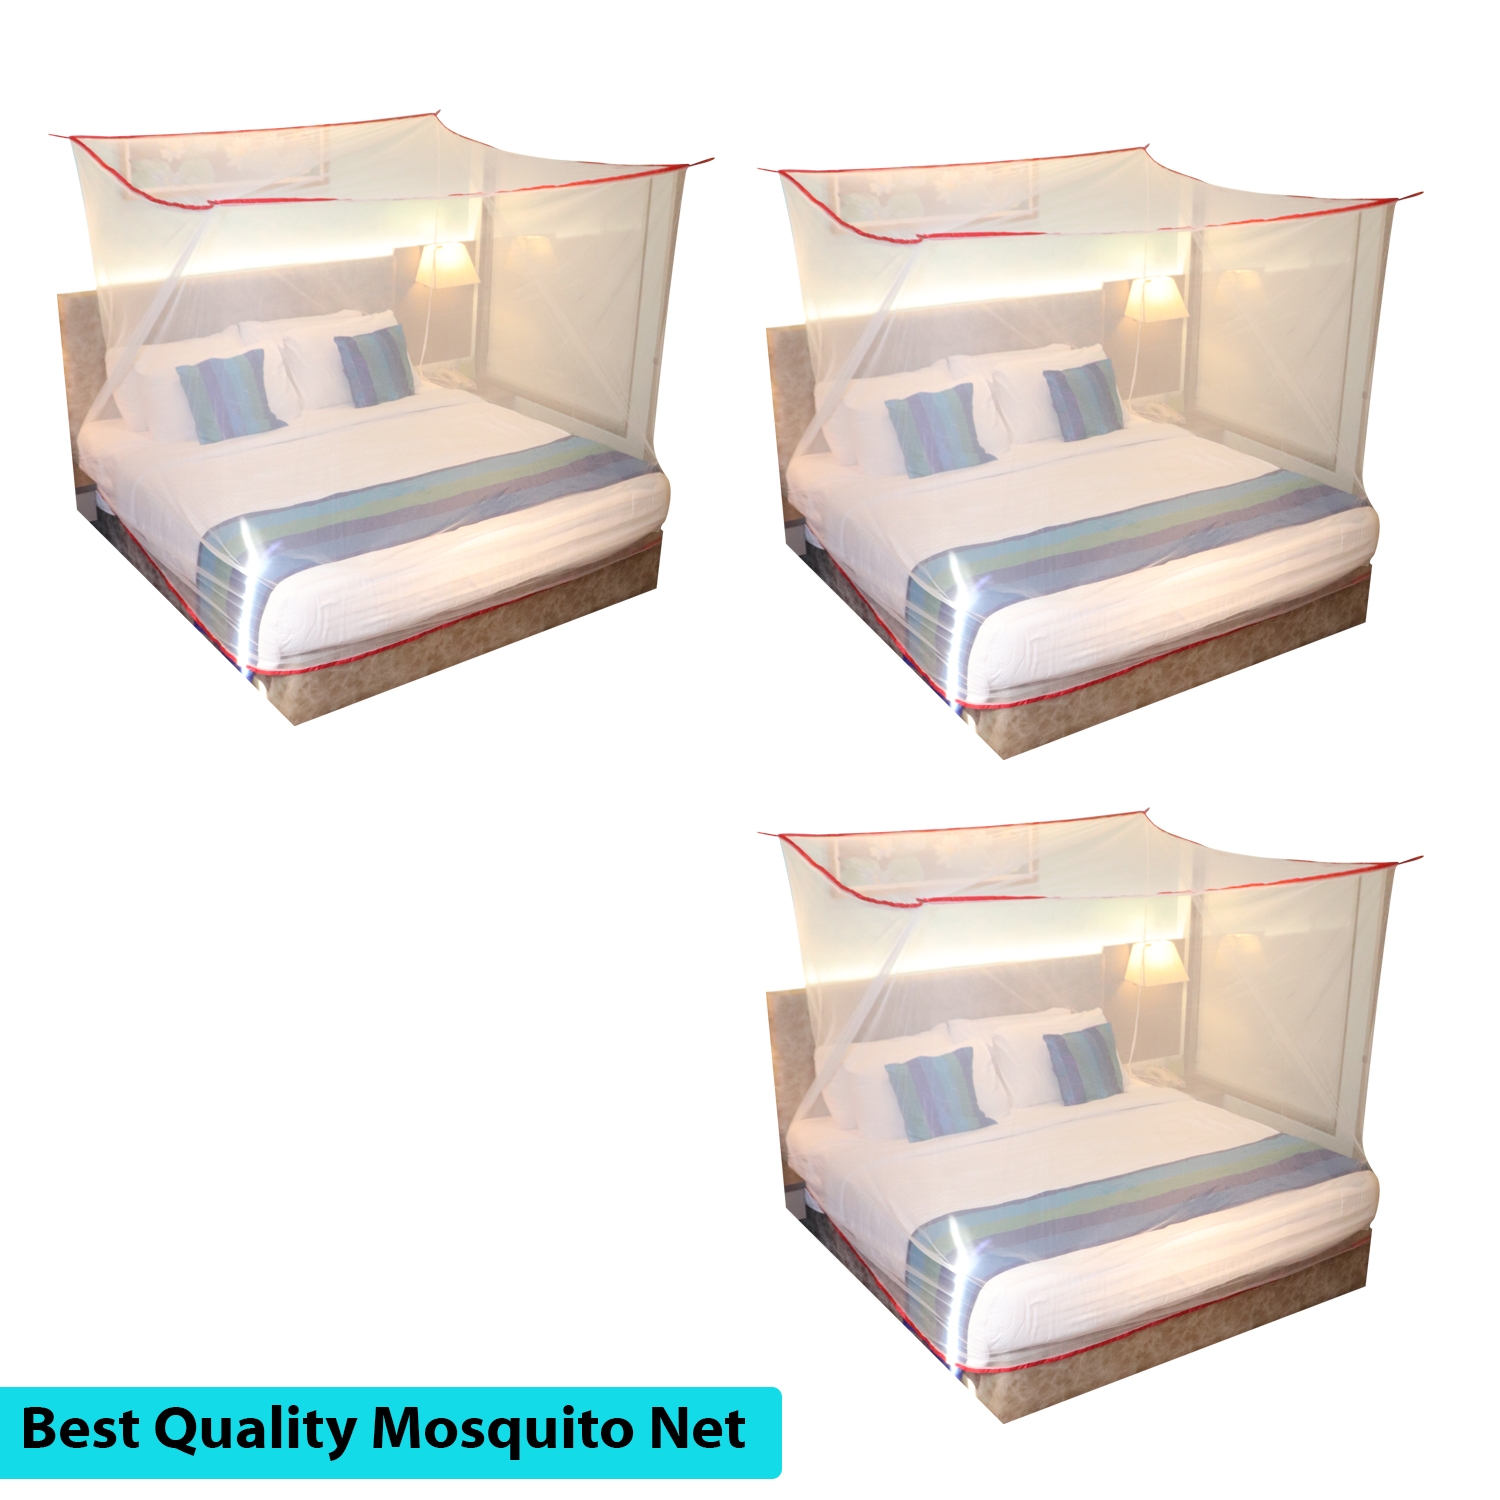 SILVER SHINE | Mosquito Net for Double Bed, King-Size, Square Hanging Foldable Polyester Net White And Red Pack of 3